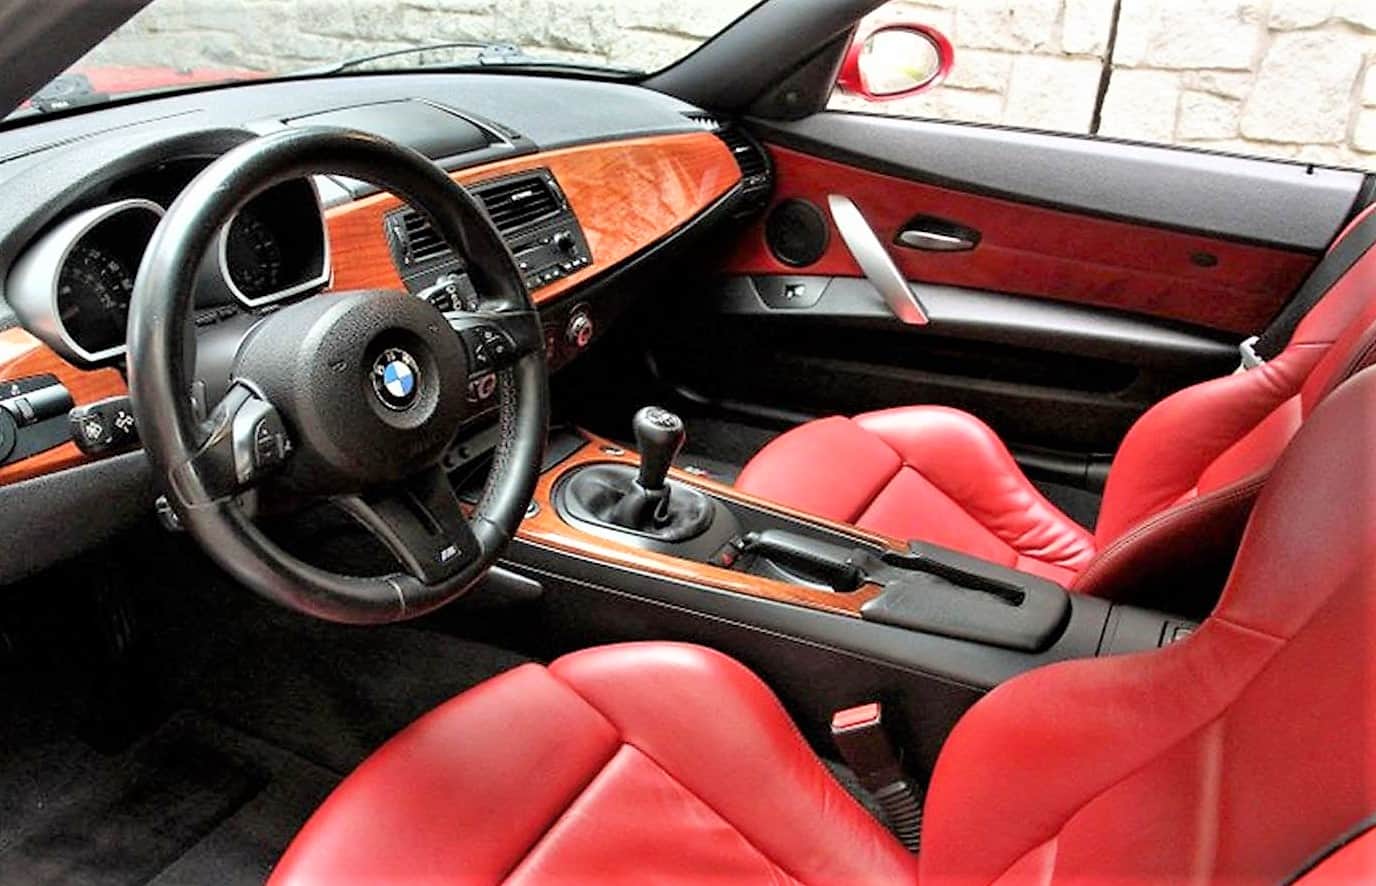 bmw, Pick of the Day: 2007 BMW Z4M, rarity, reliability and fast fun, ClassicCars.com Journal